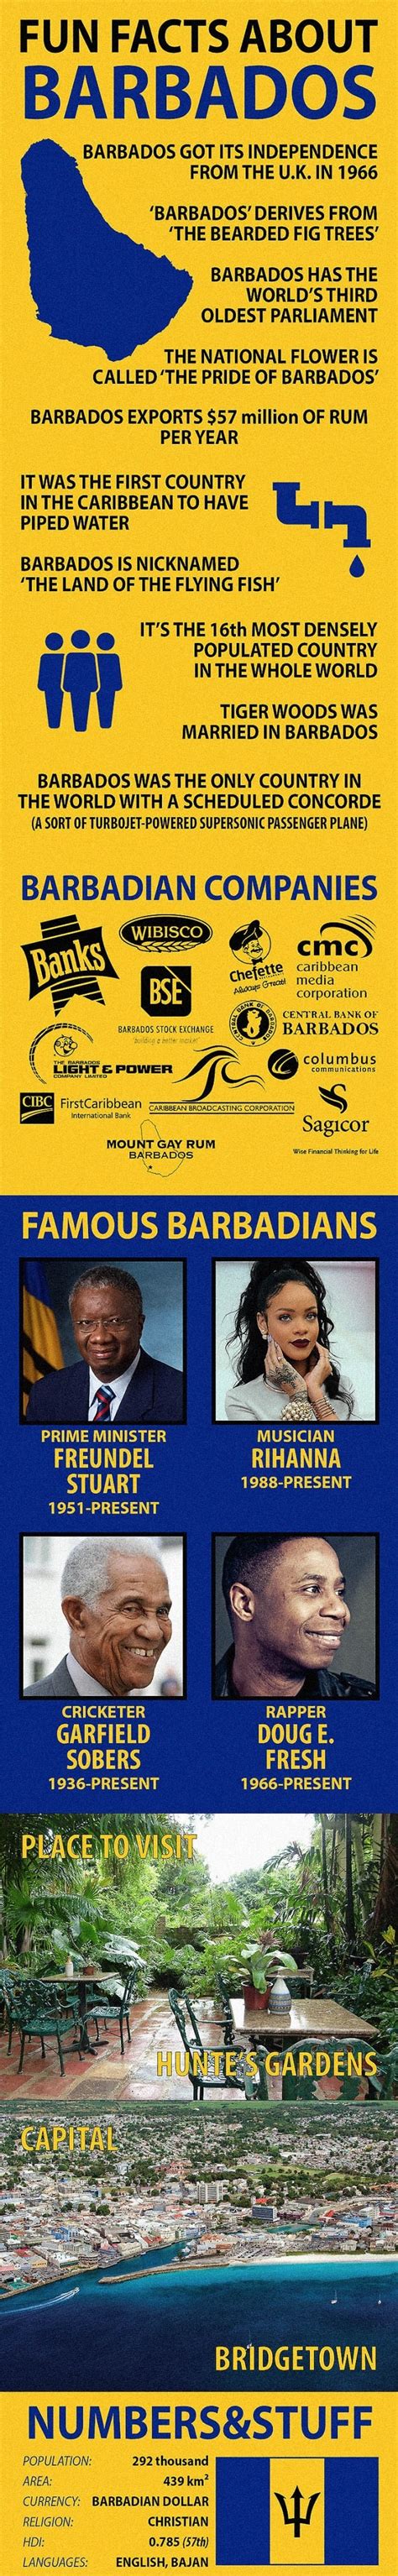 Facts About Barbados